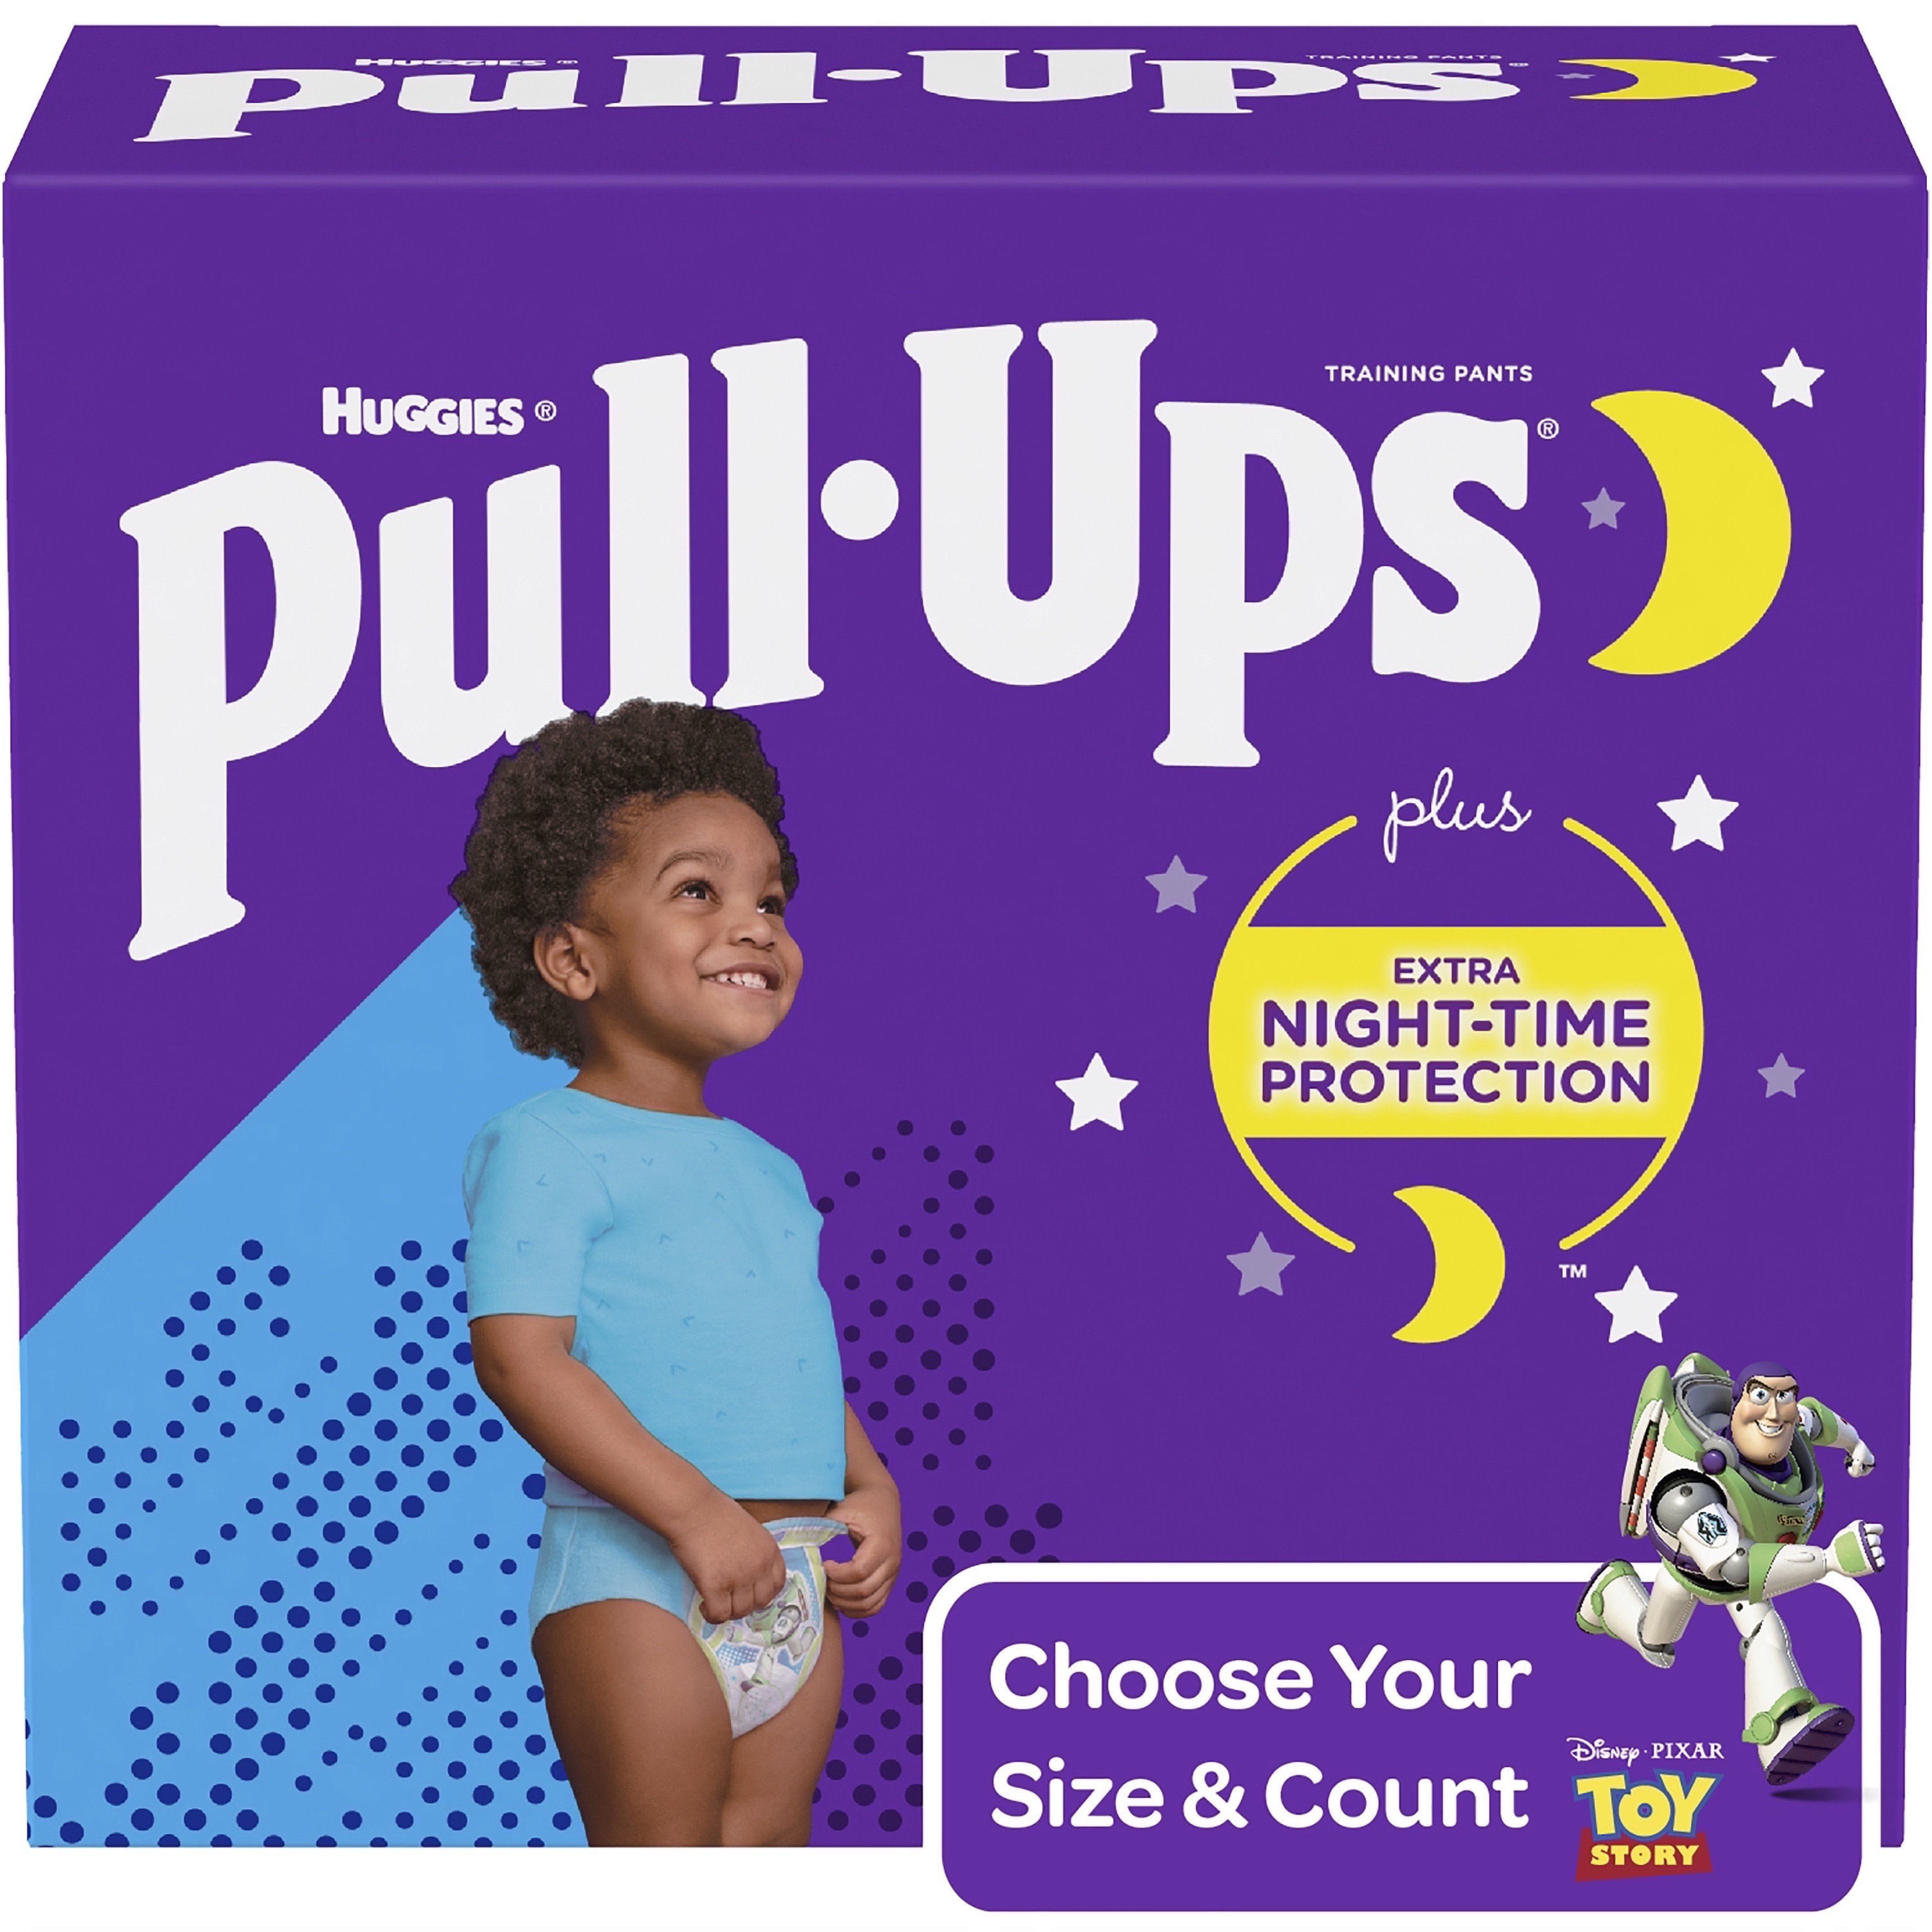 Pull-Ups Night-time for Boys | Huggies® Pull-Ups®